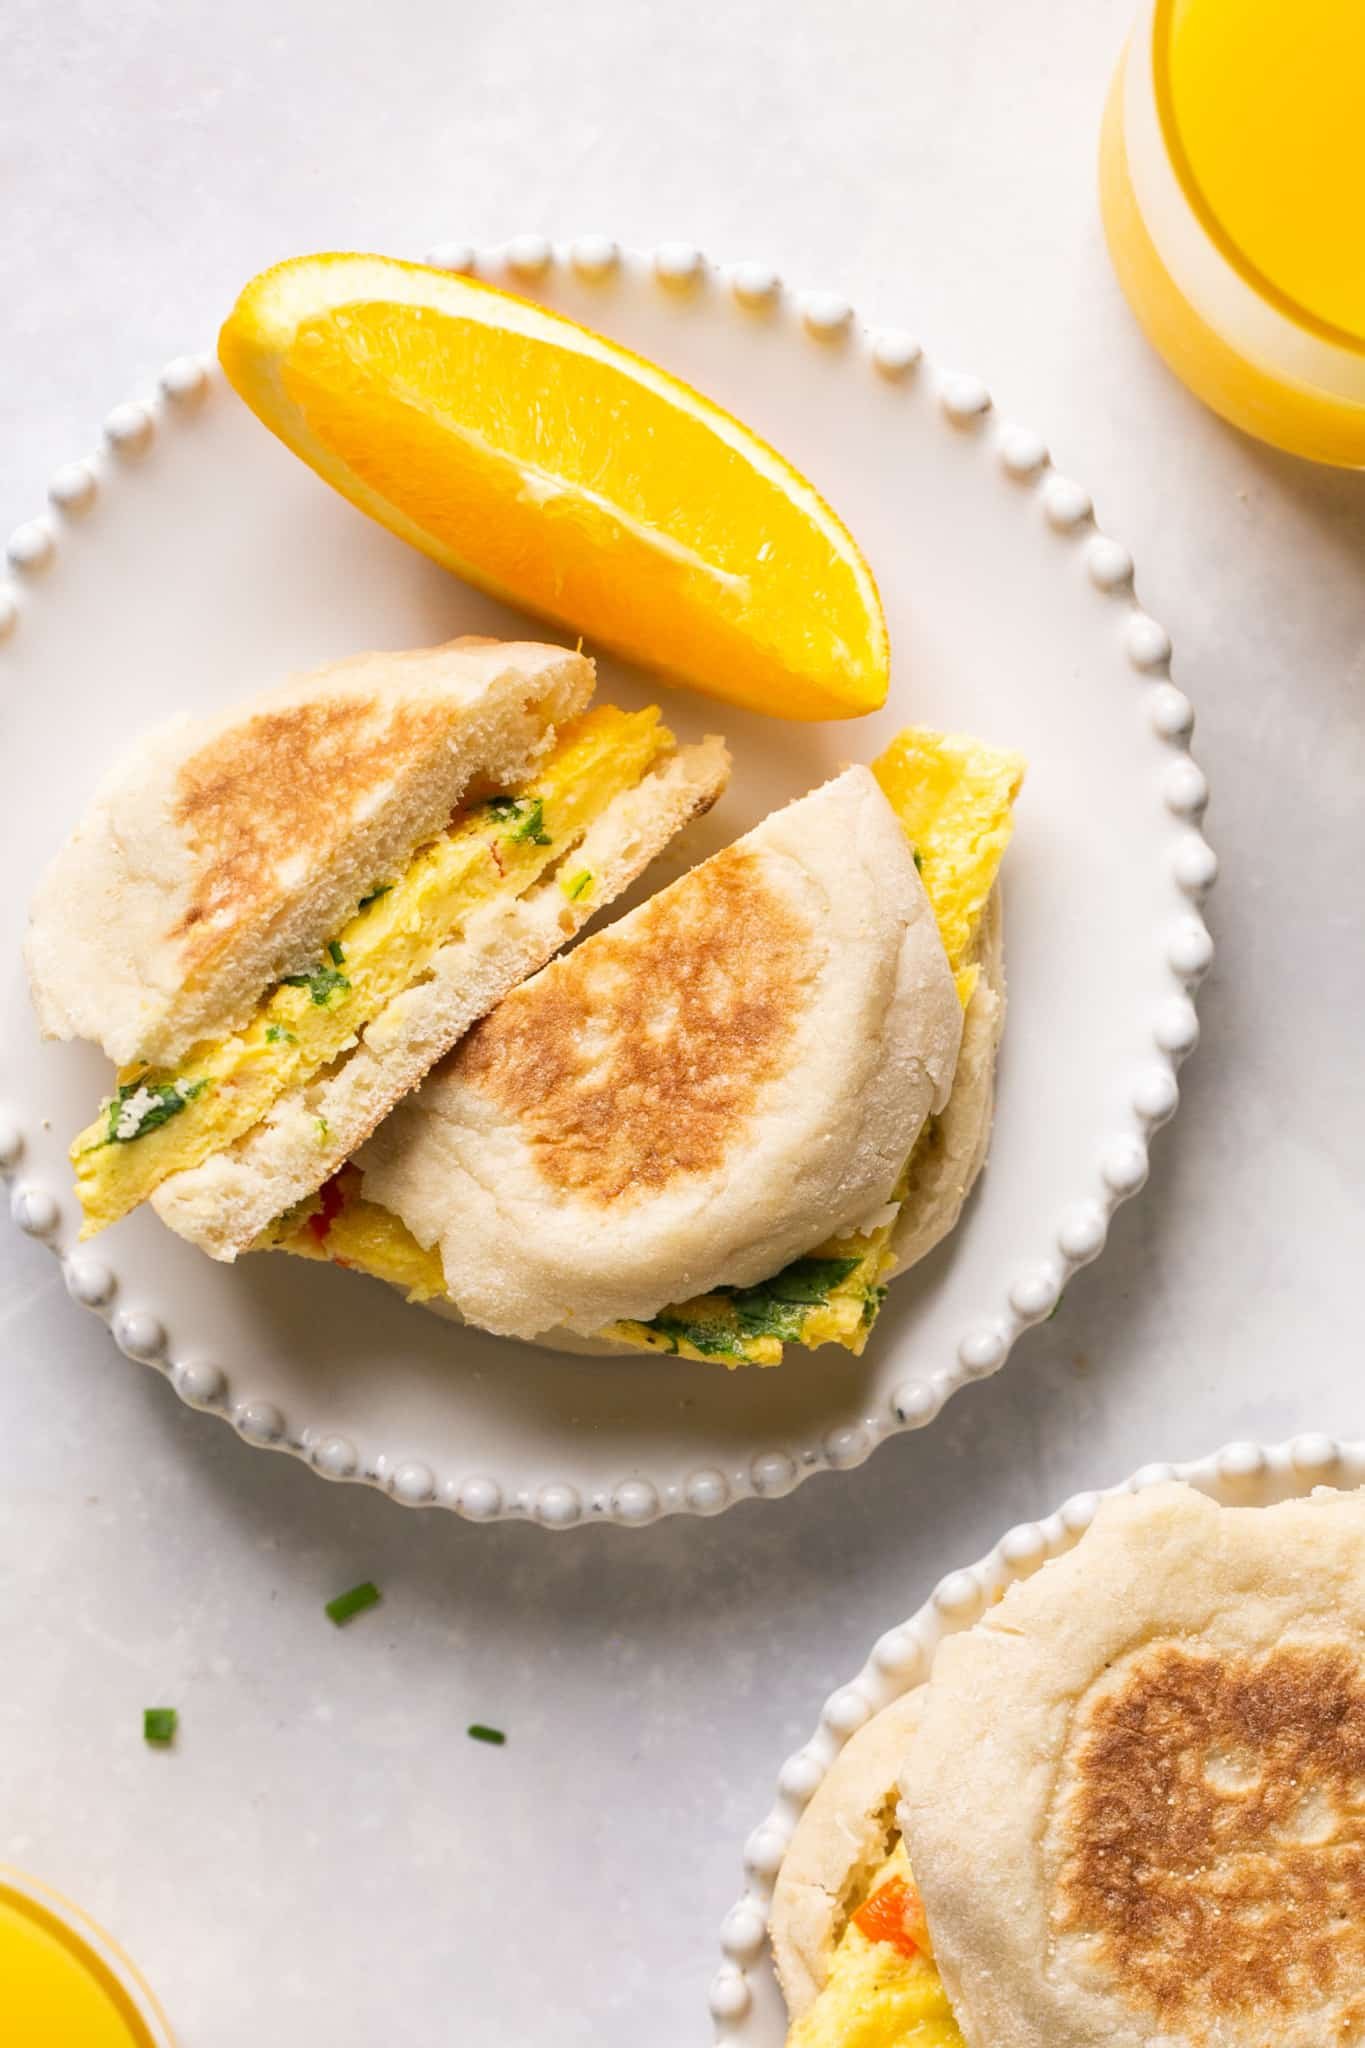 a breakfast sandwich on a white plate made with eggs on an english muffin and an orange slice on the side. 